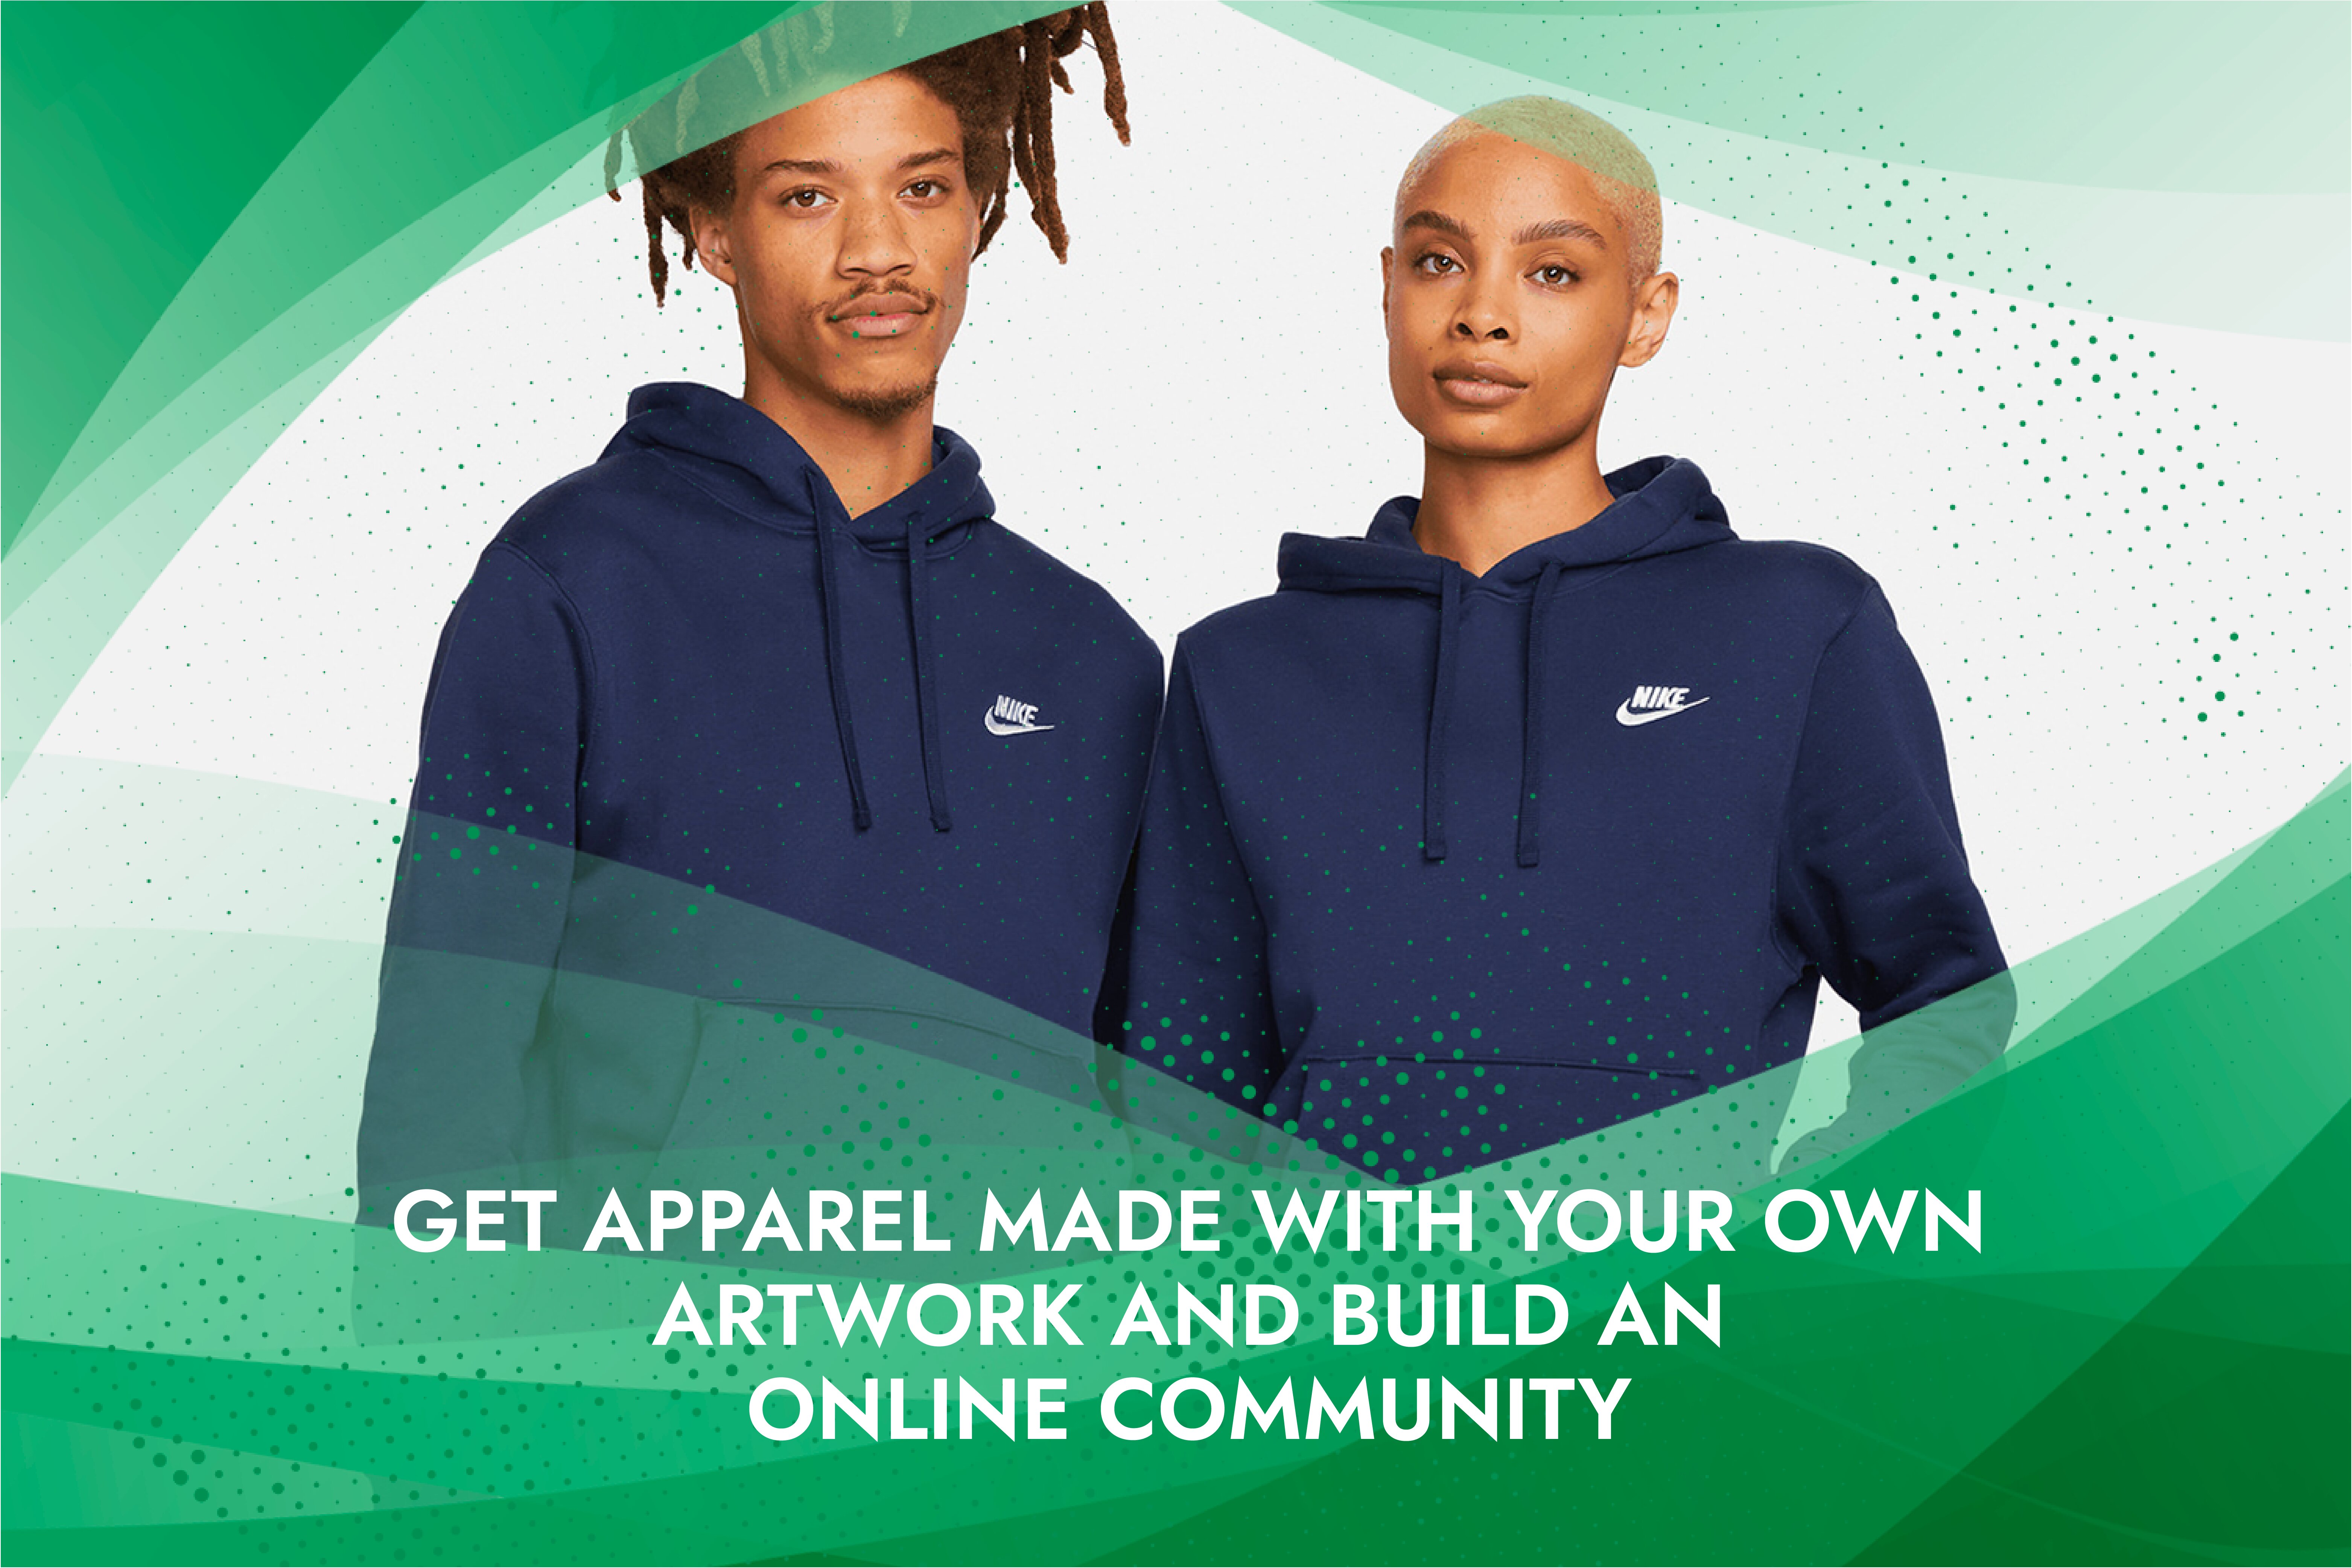 Get Apparel Made With Your Artwork And Build an Online Community